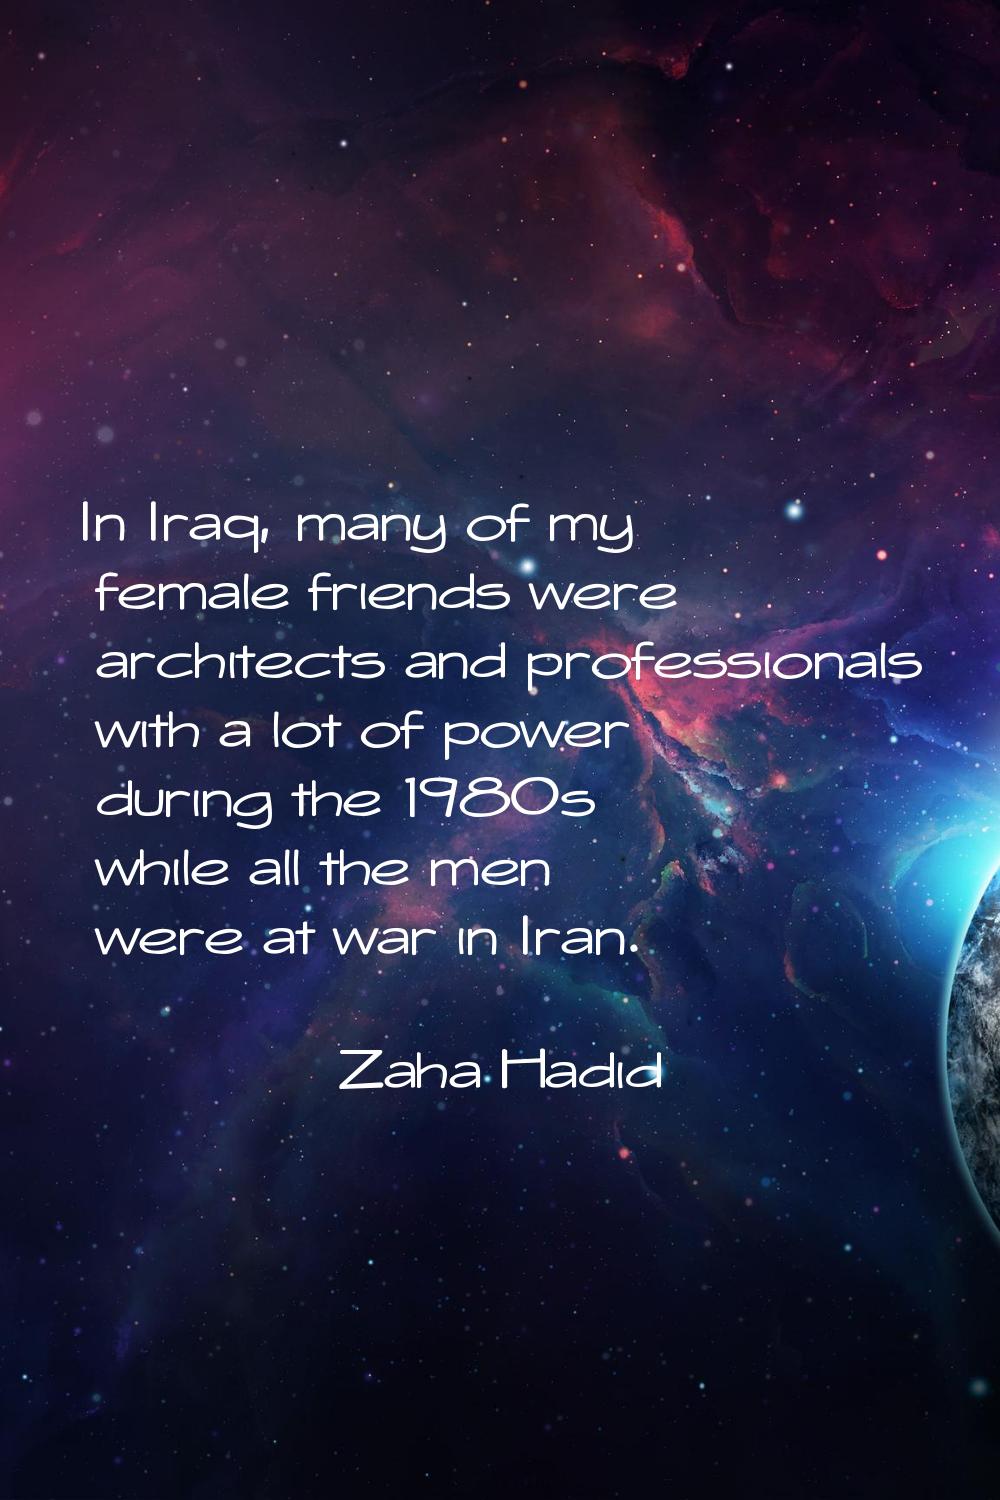 In Iraq, many of my female friends were architects and professionals with a lot of power during the